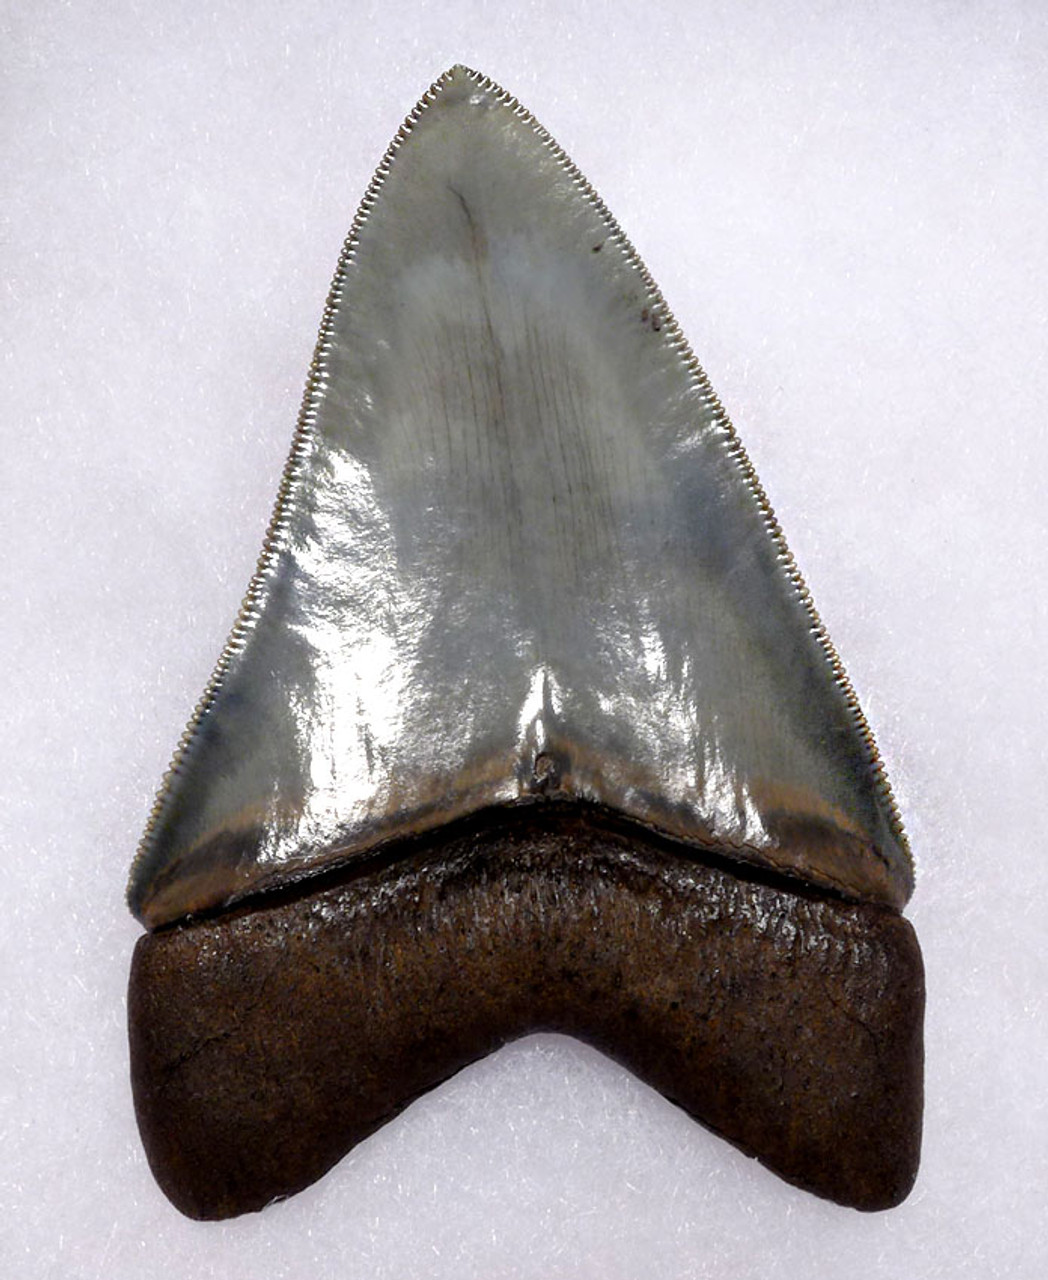 SH6-370 - INVESTMENT GRADE 4 INCH WARM BLUE-SILVER MEGALODON SHARK TOOTH